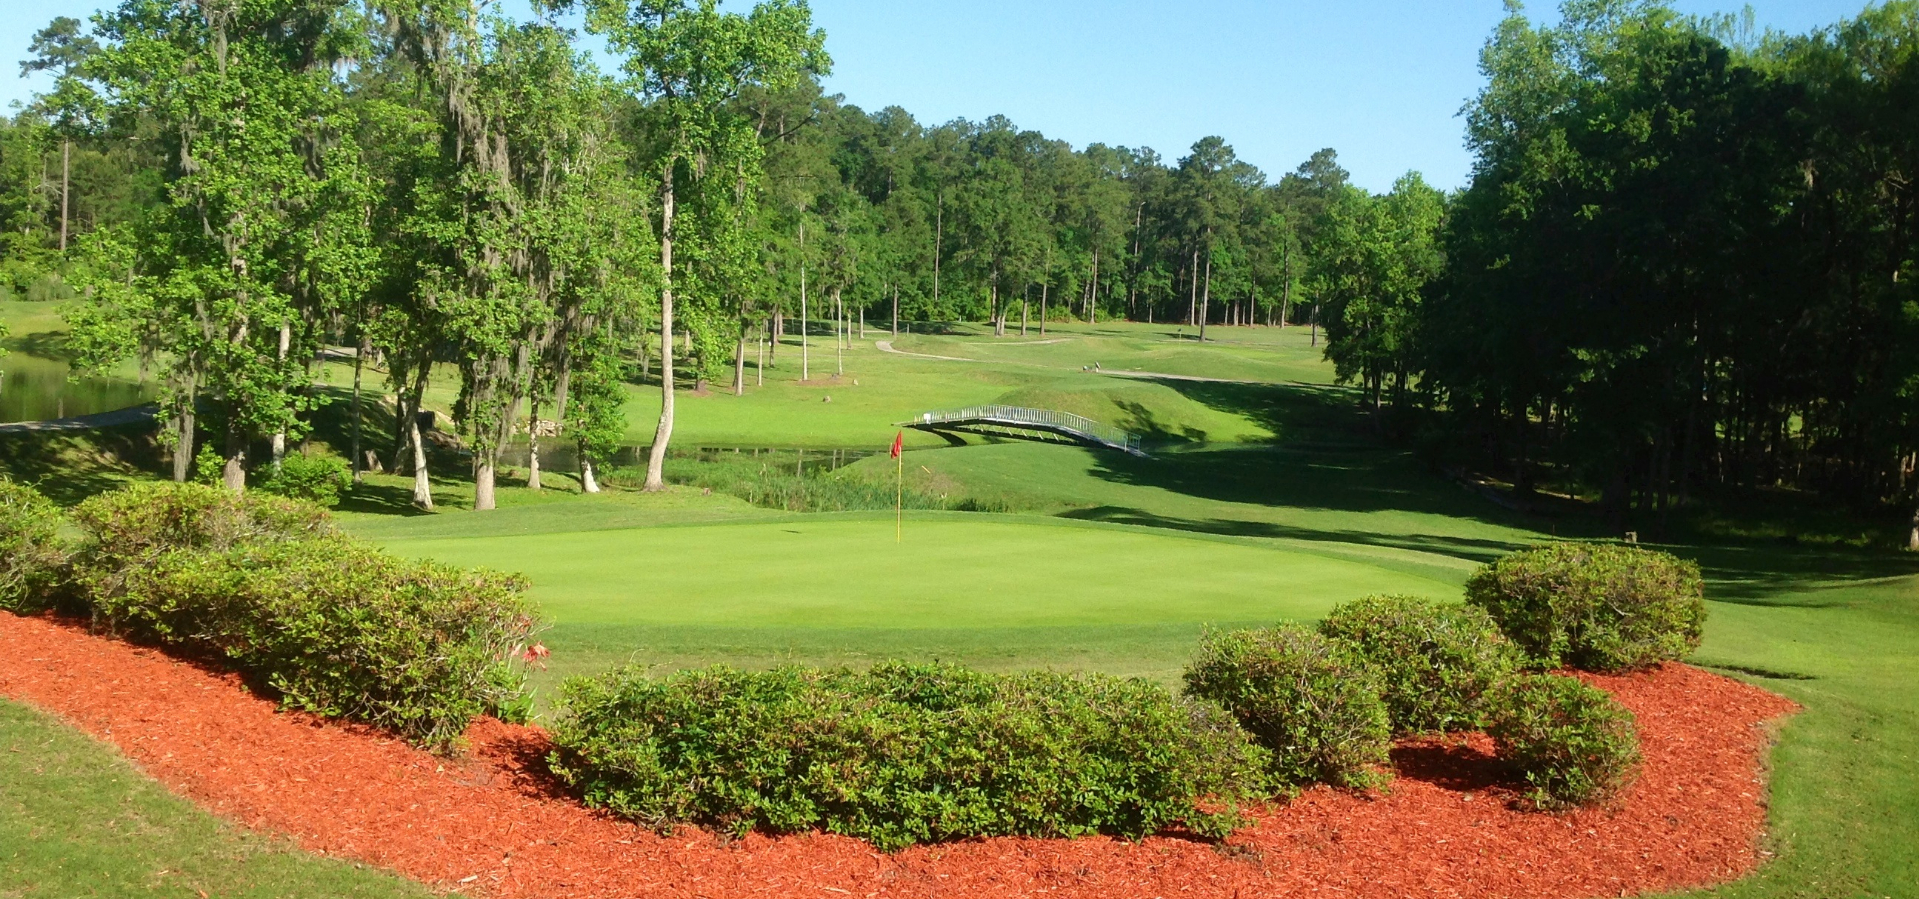 view of golf course green with bright mulch and trees